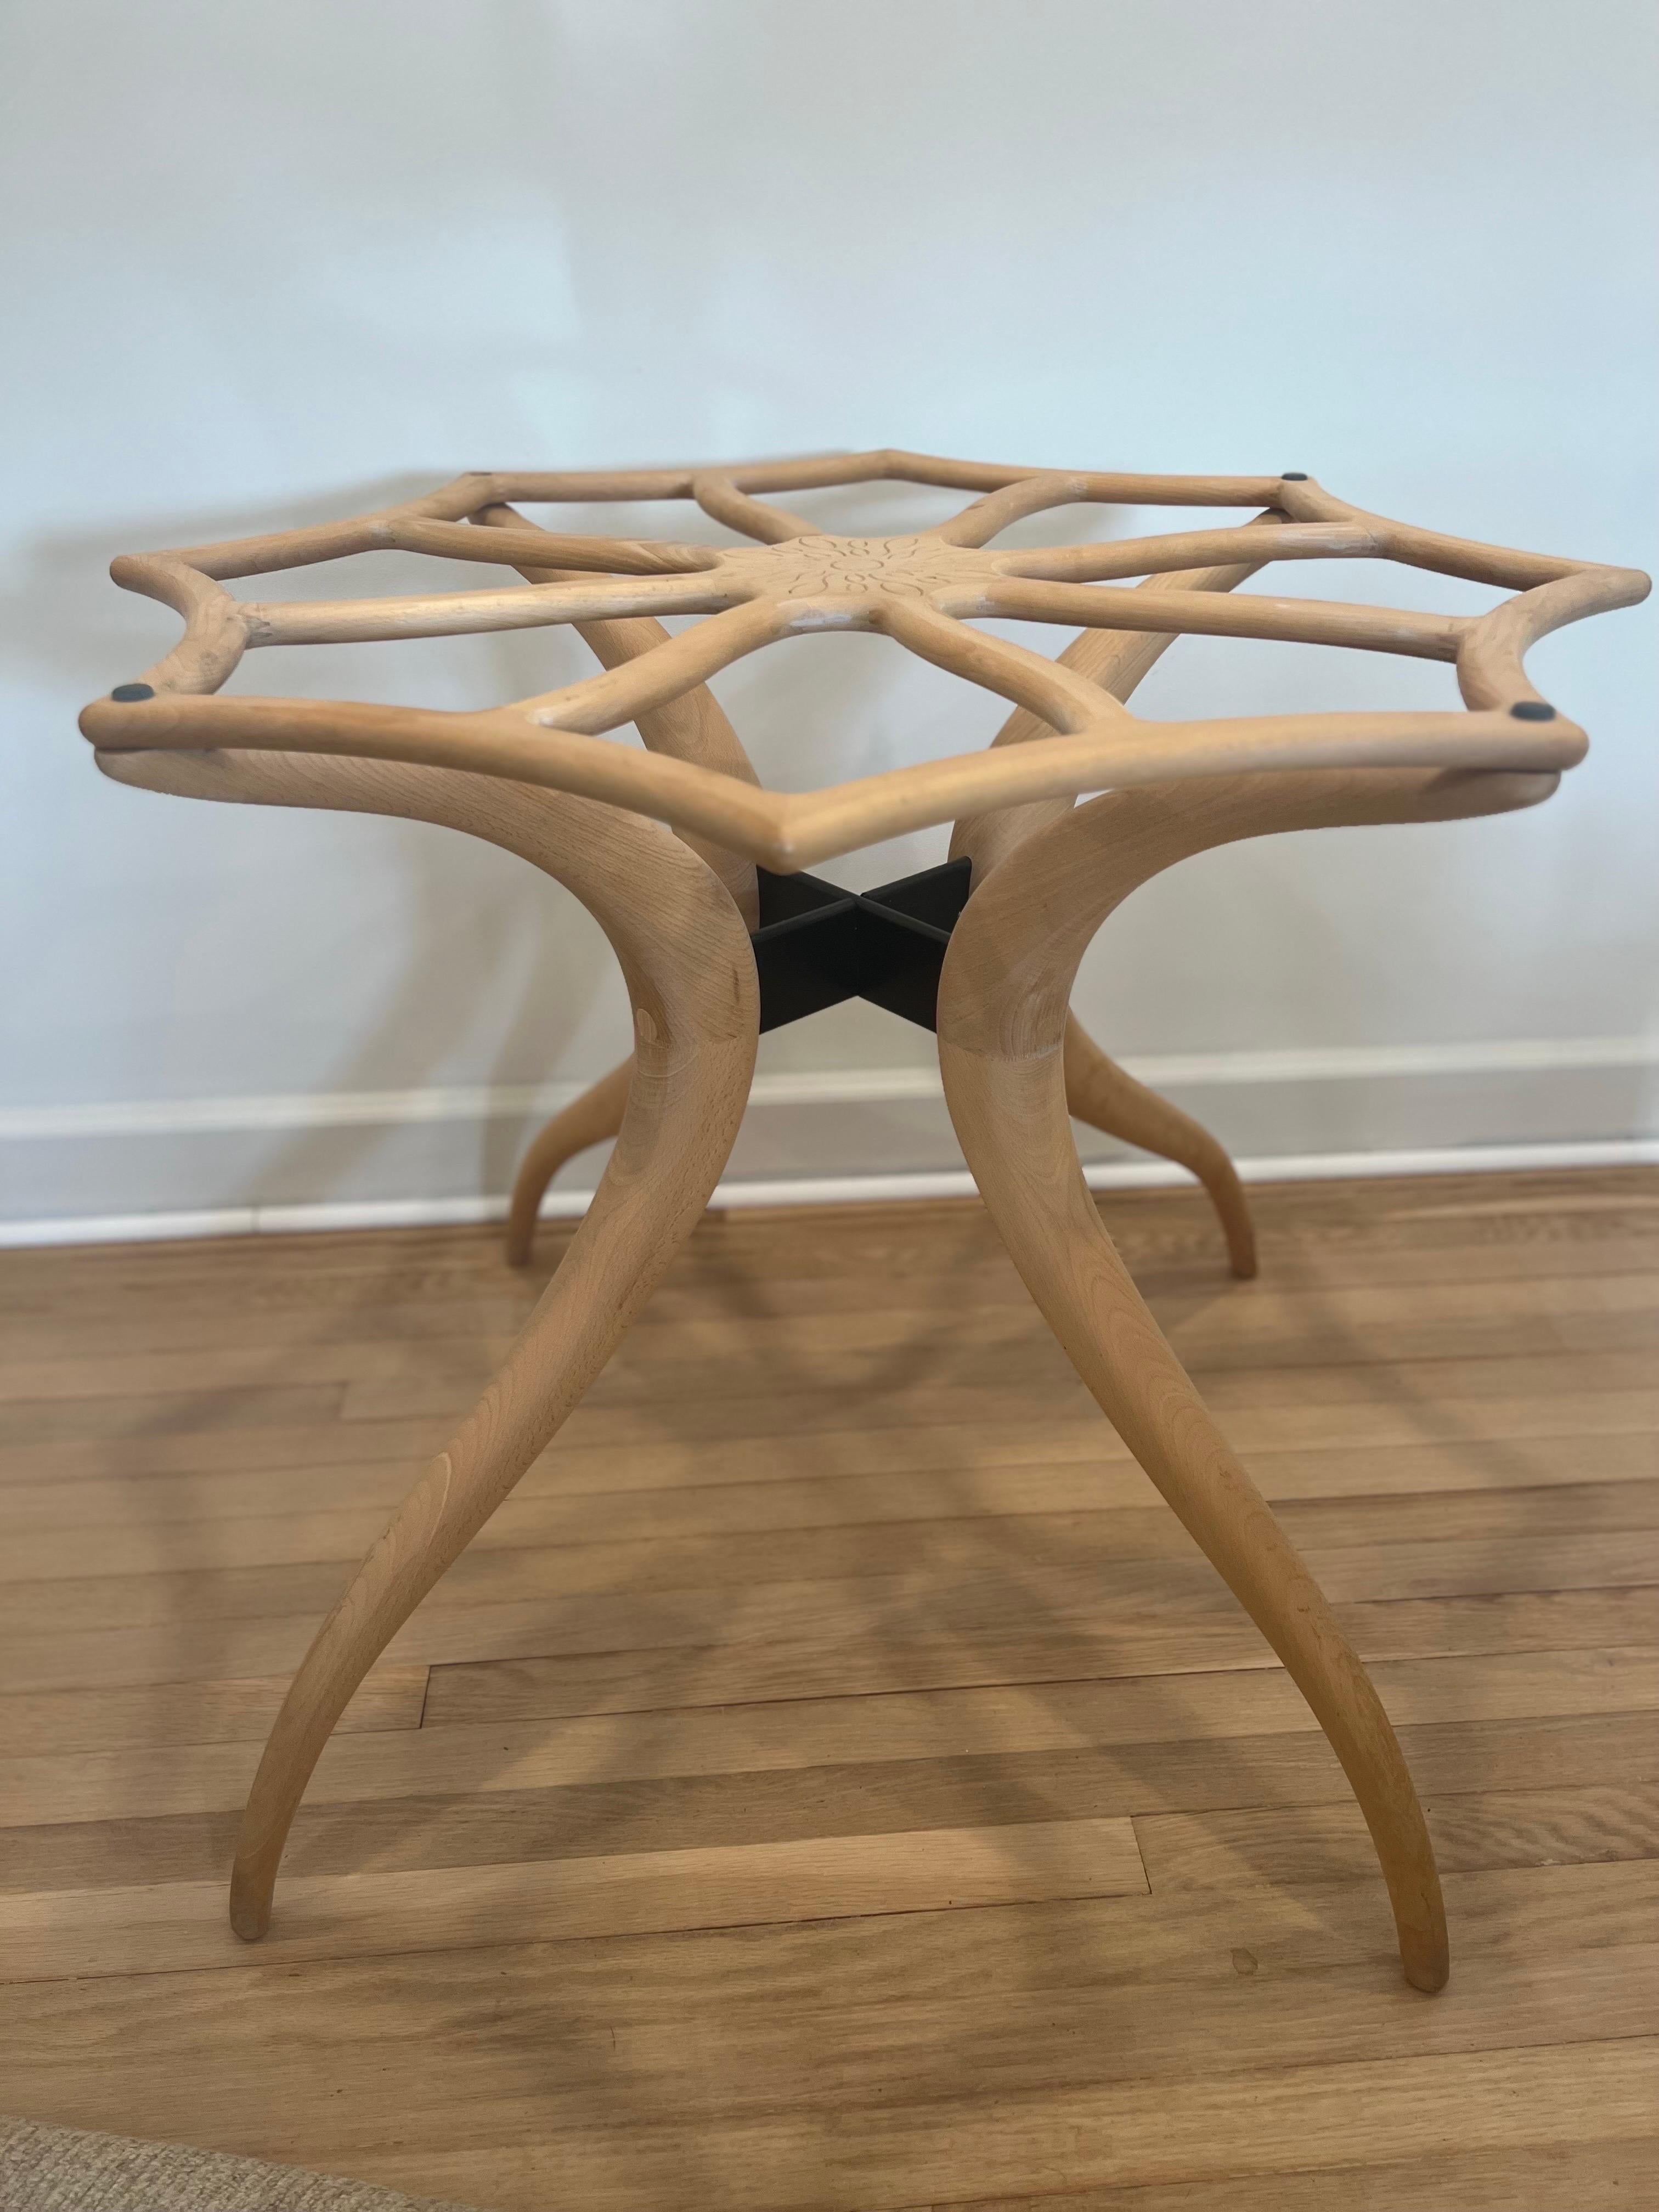 Handmade custom dining table. Raw organic unstained.
Sculptural bentwood legs with small iron stretcher in the center.
Does not include top. We currently have it with a piece of stone on top and it looks amazing, but would also look great with